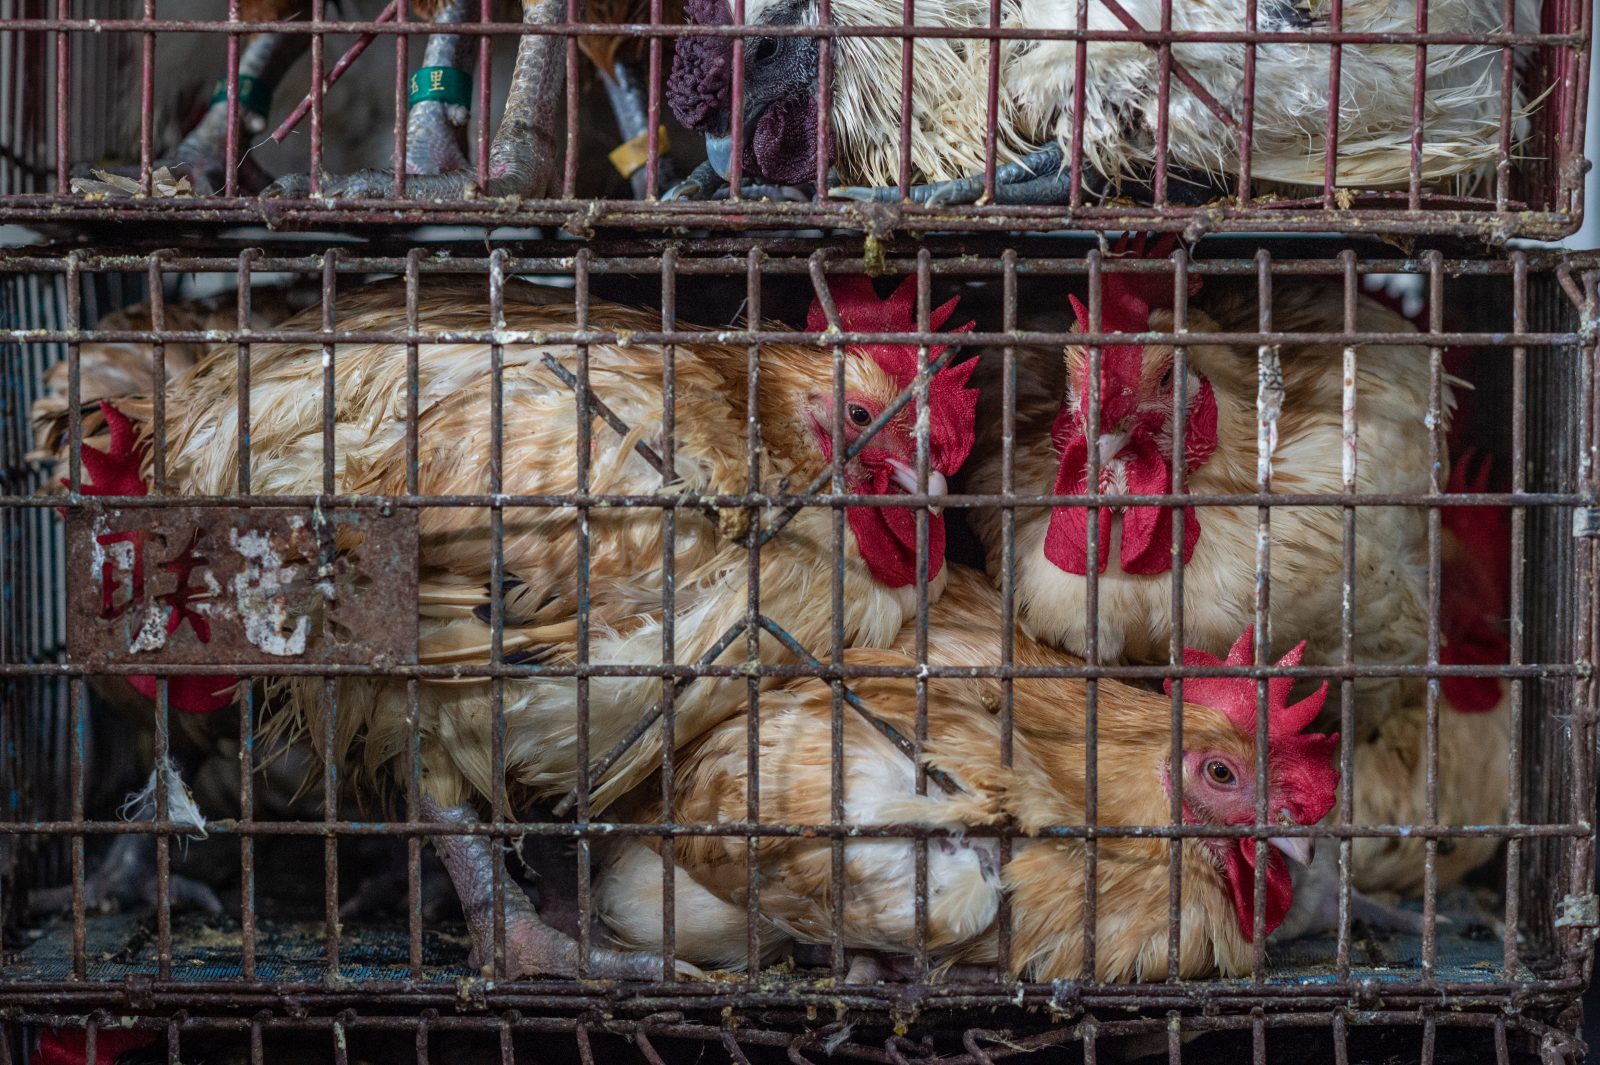 Birds crammed into transport cages arrive at a slaughterhouse.